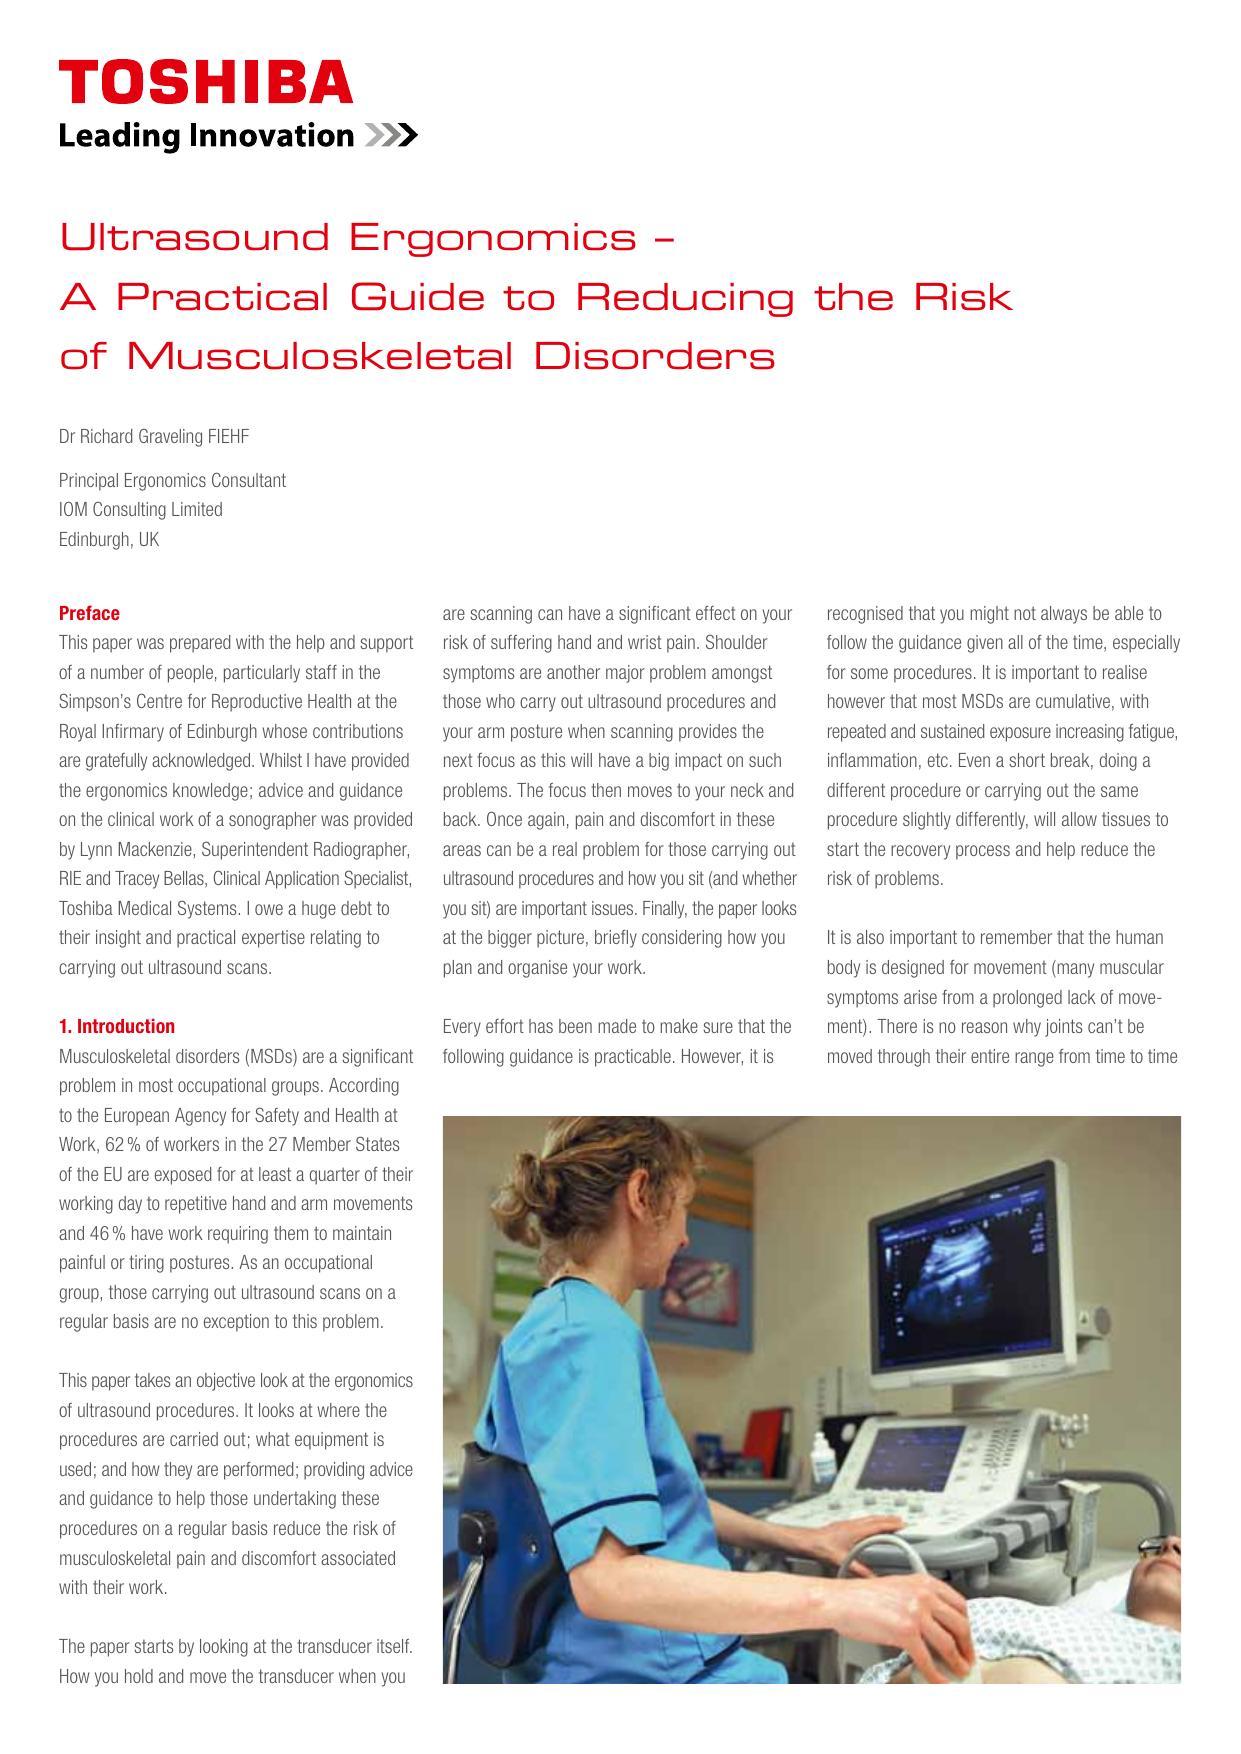 ultrasound-ergonomics-a-practical-guide-to-reducing-the-risk-of-musculoskeletal-disorders.pdf